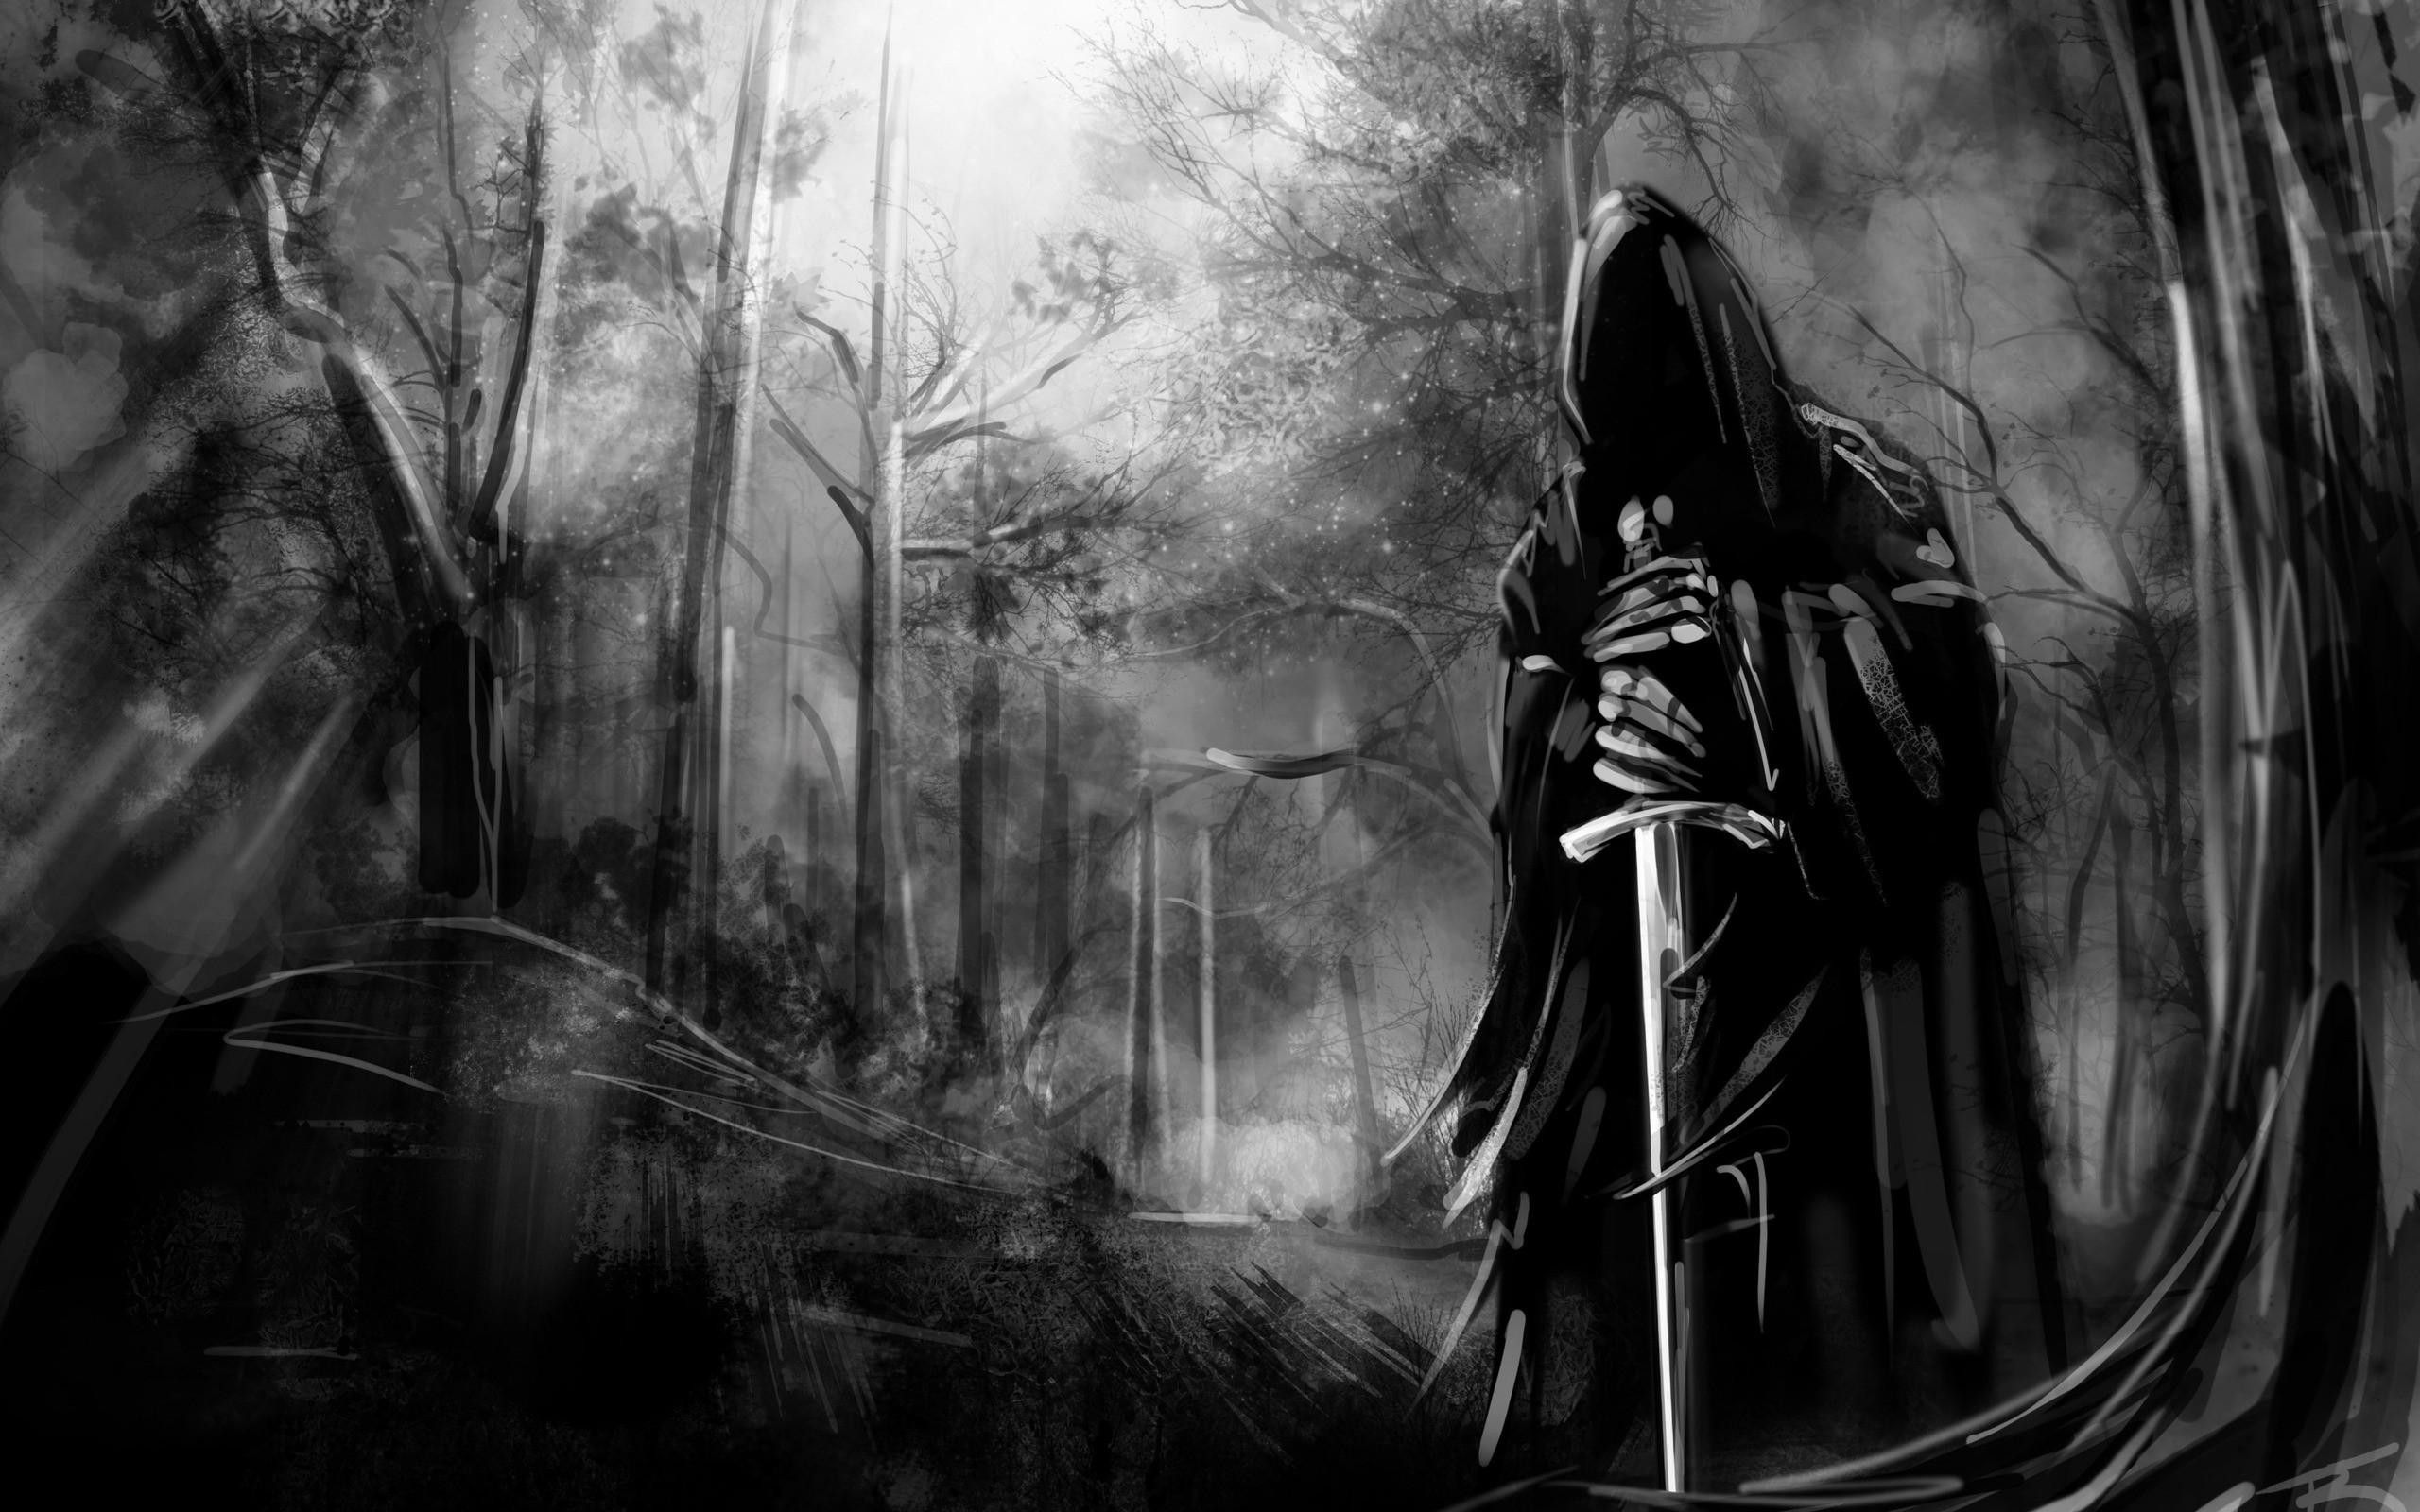 Dark Gothic Wallpapers  HD Wallpapers  ID 8879